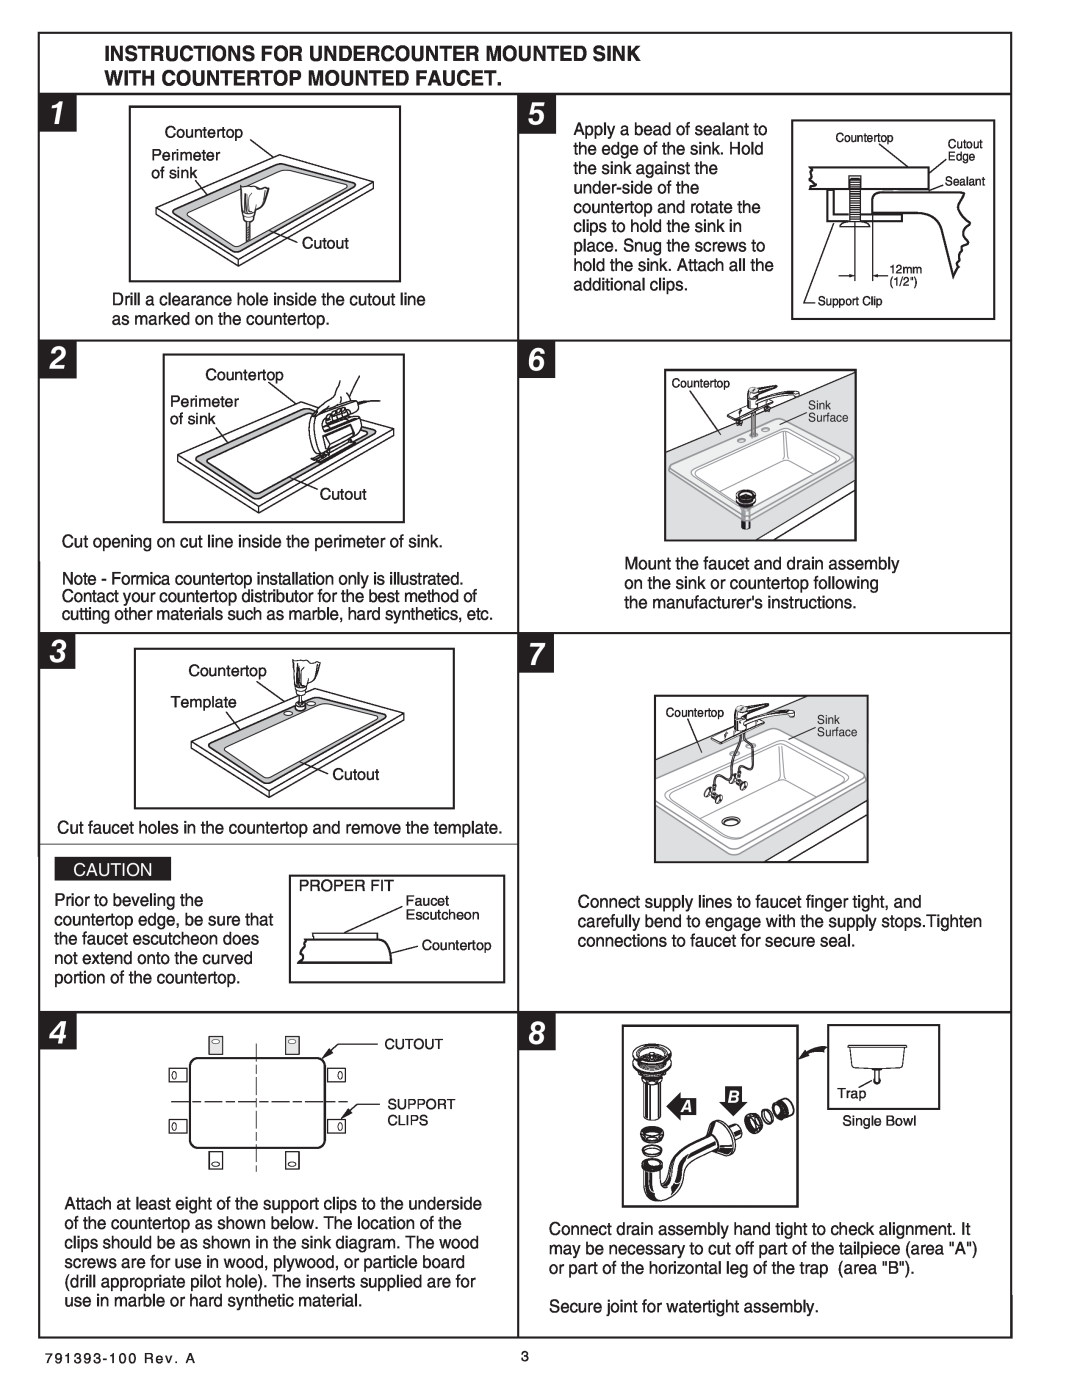 American Standard SERIES 7193 Instructions For Undercounter Mounted Sink, With Countertop Mounted Faucet 